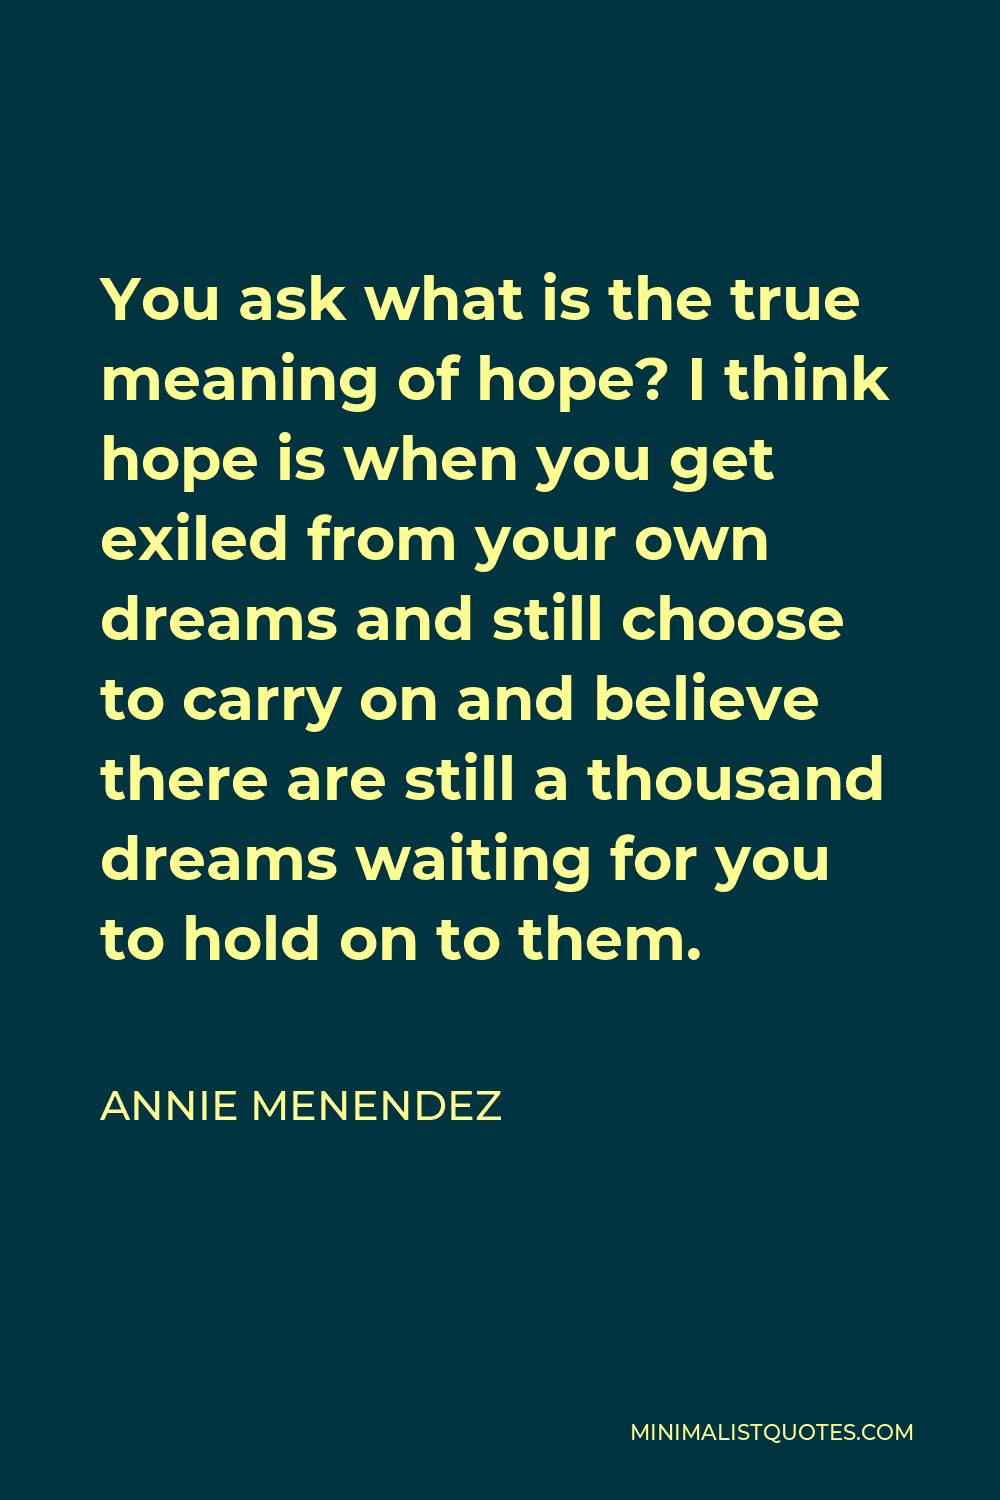 Annie Menendez Quote - You ask what is the true meaning of hope? I think hope is when you get exiled from your own dreams and still choose to carry on and believe there are still a thousand dreams waiting for you to hold on to them.